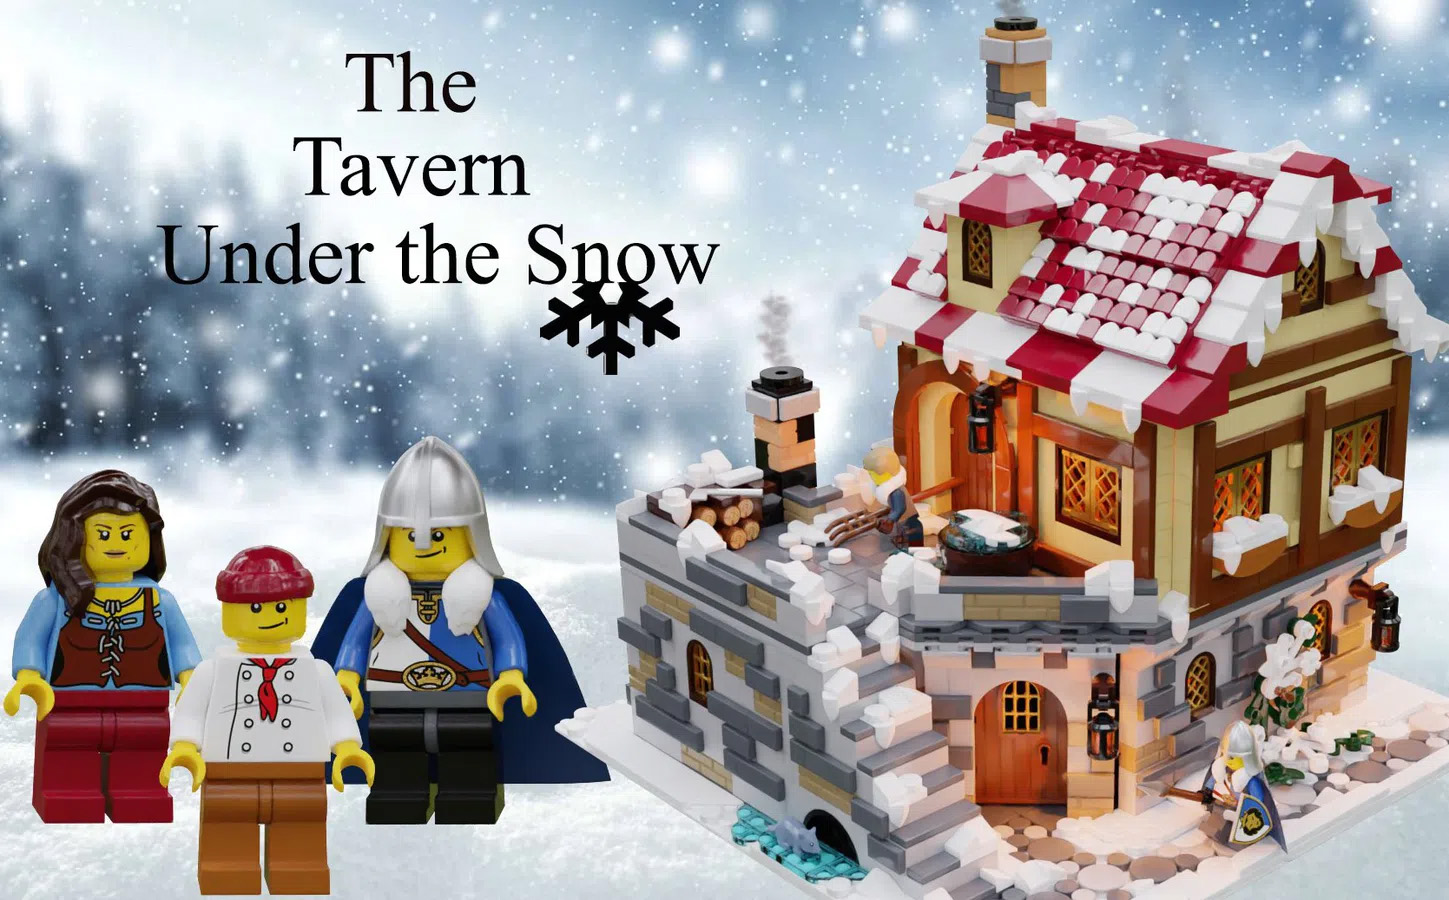 THE TAVERN UNDER THE SNOW Achieves 10K Support on LEGO IDEAS